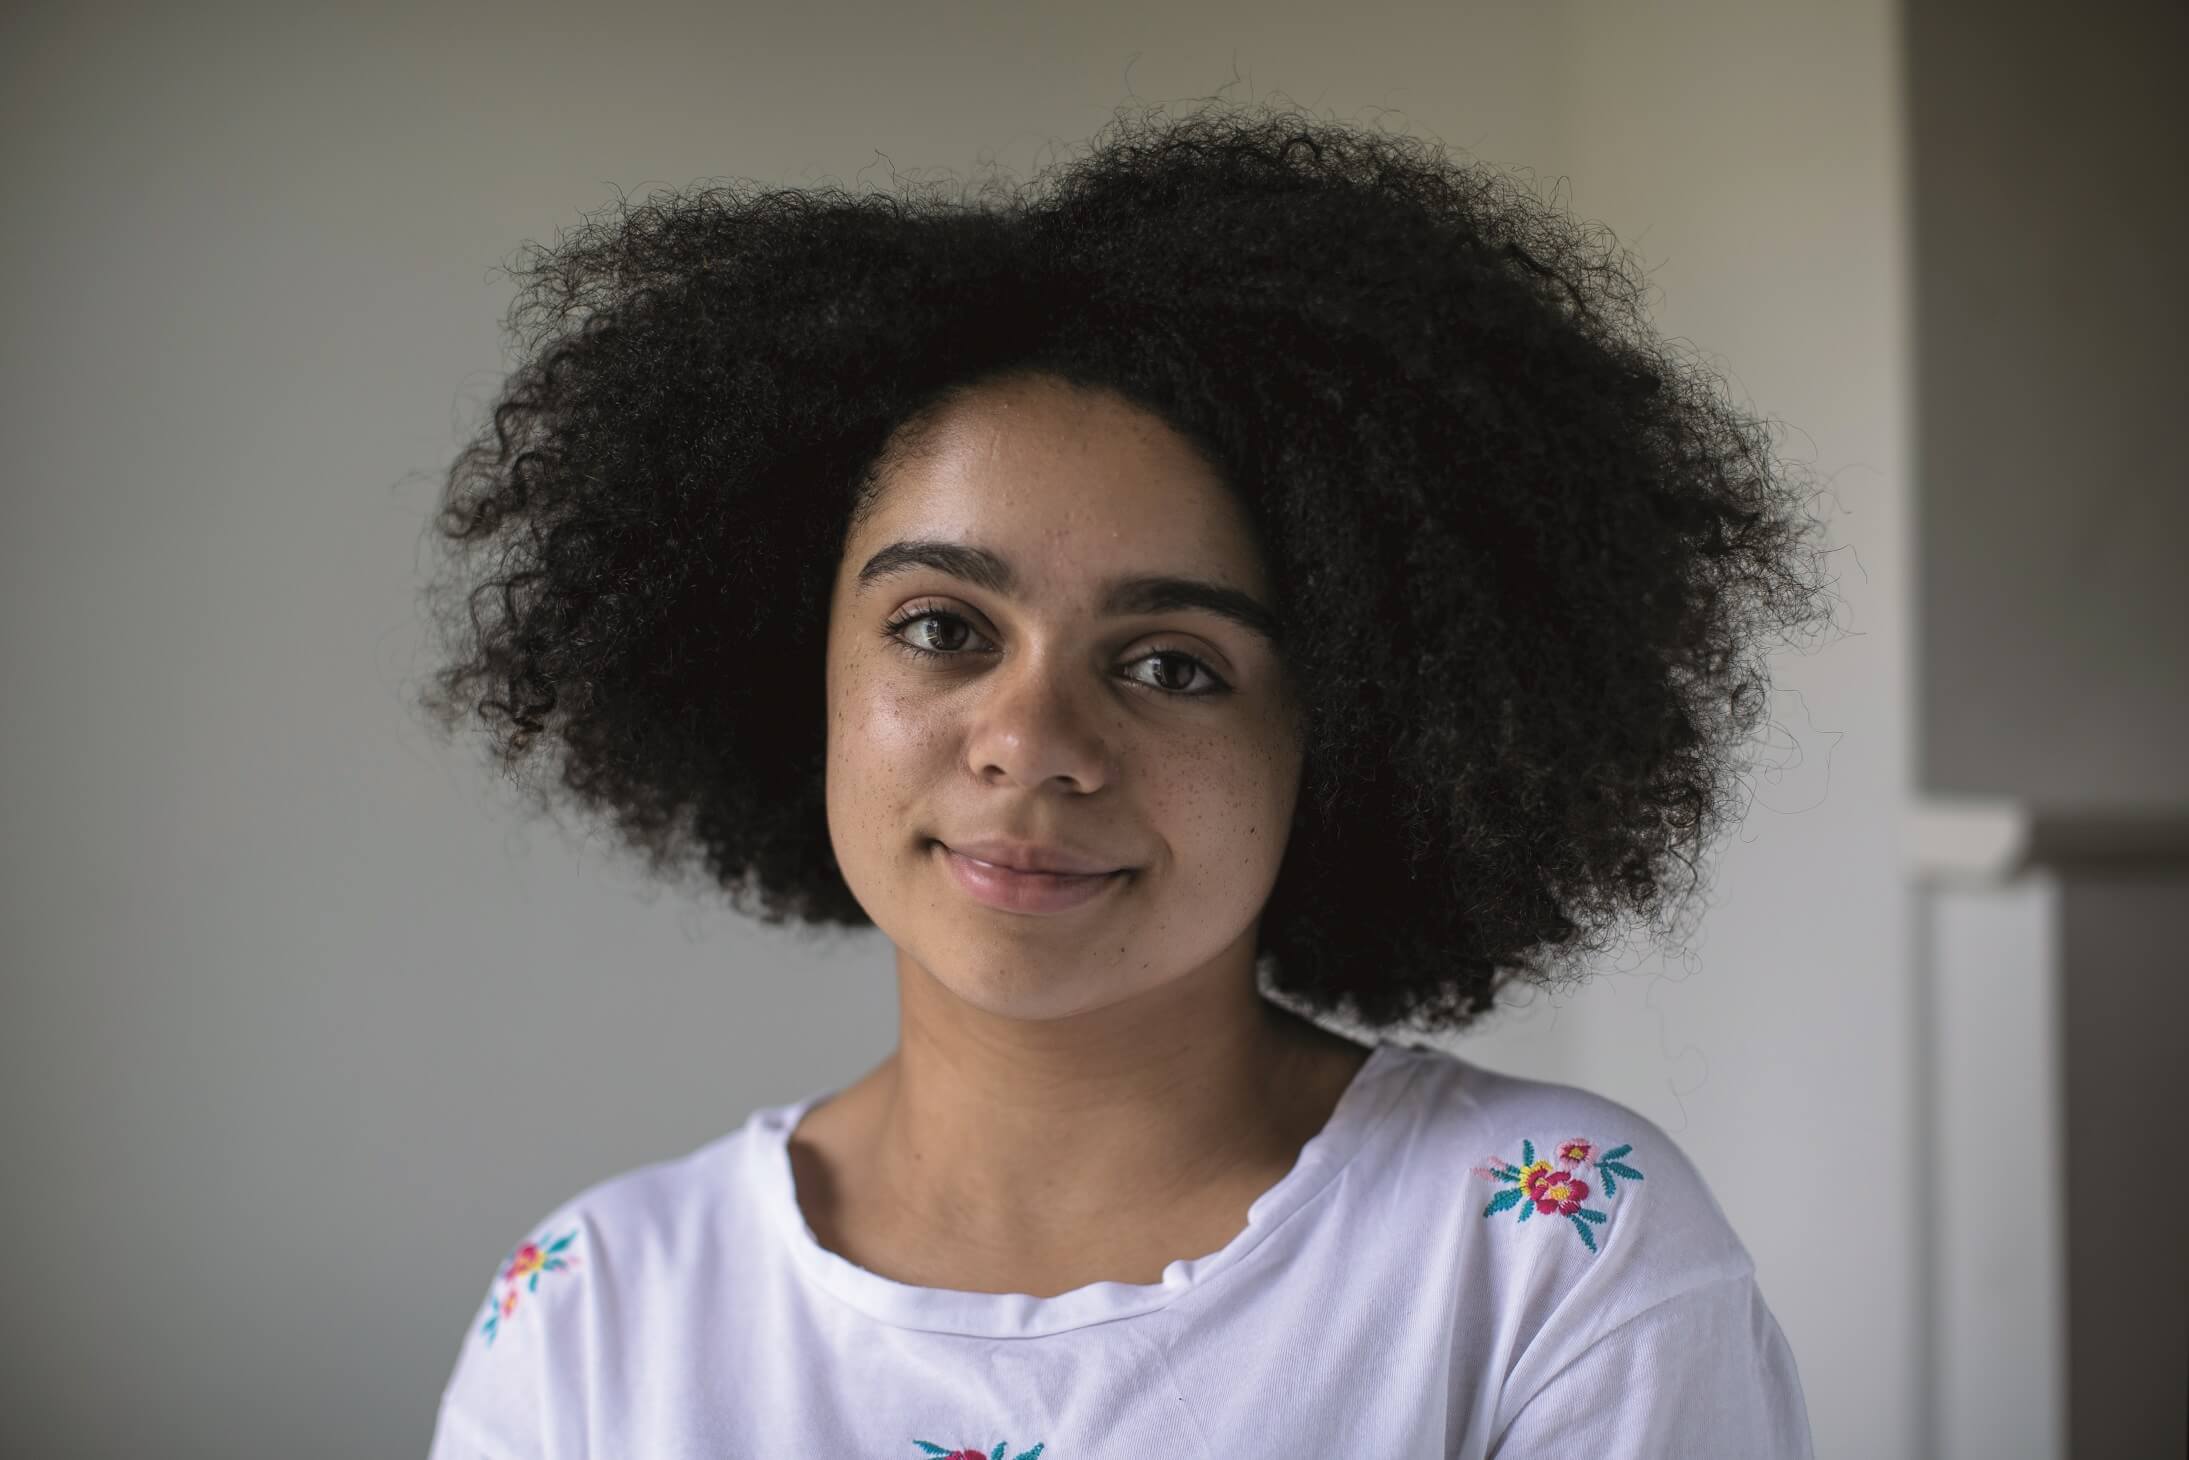 Erica, 15, is supported by Barnardo's having experienced domestic abuse